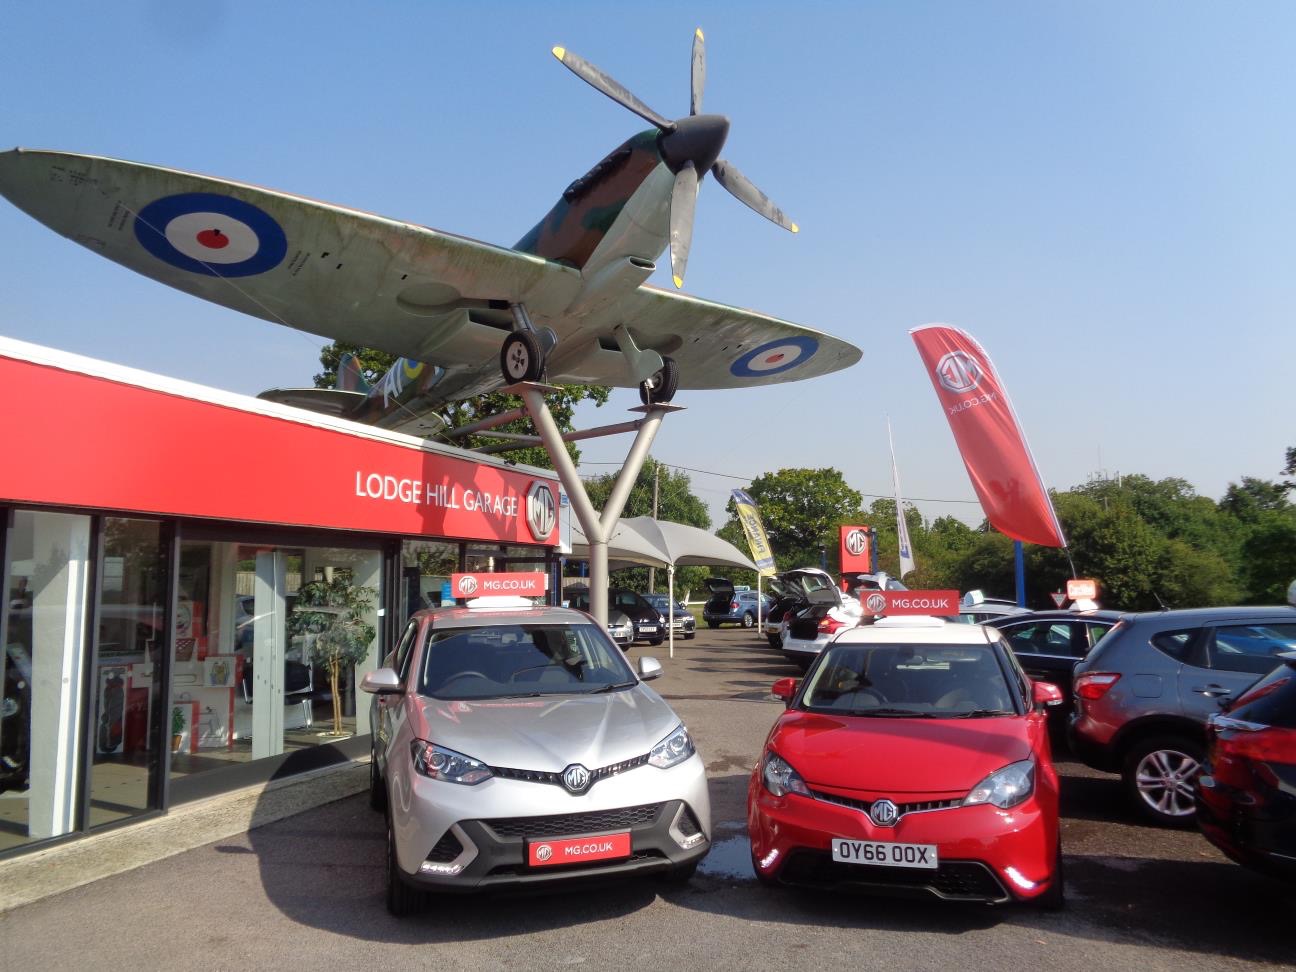 Videos Motor Shows Press Office Contacts Links RSS BACK TO THE FUTURE FOR MG via Lodge Hill Garage in Abingdon